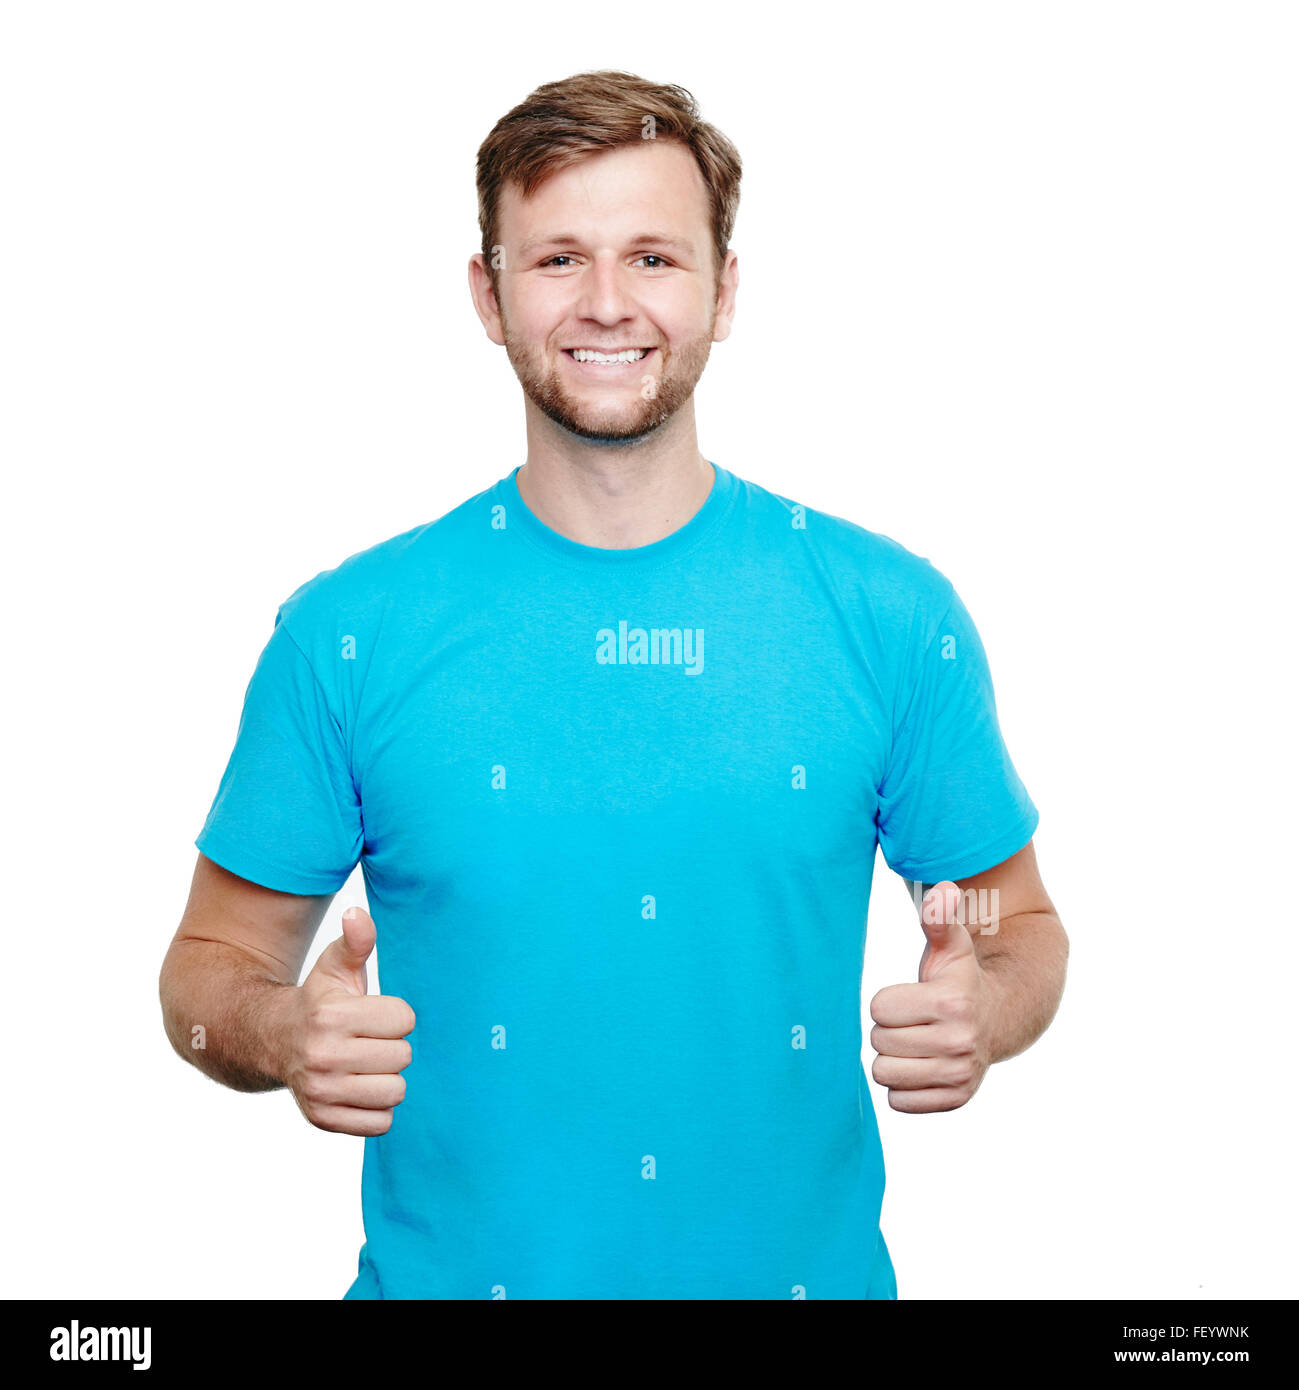 Smiling young man showing thumbs up Stock Photo